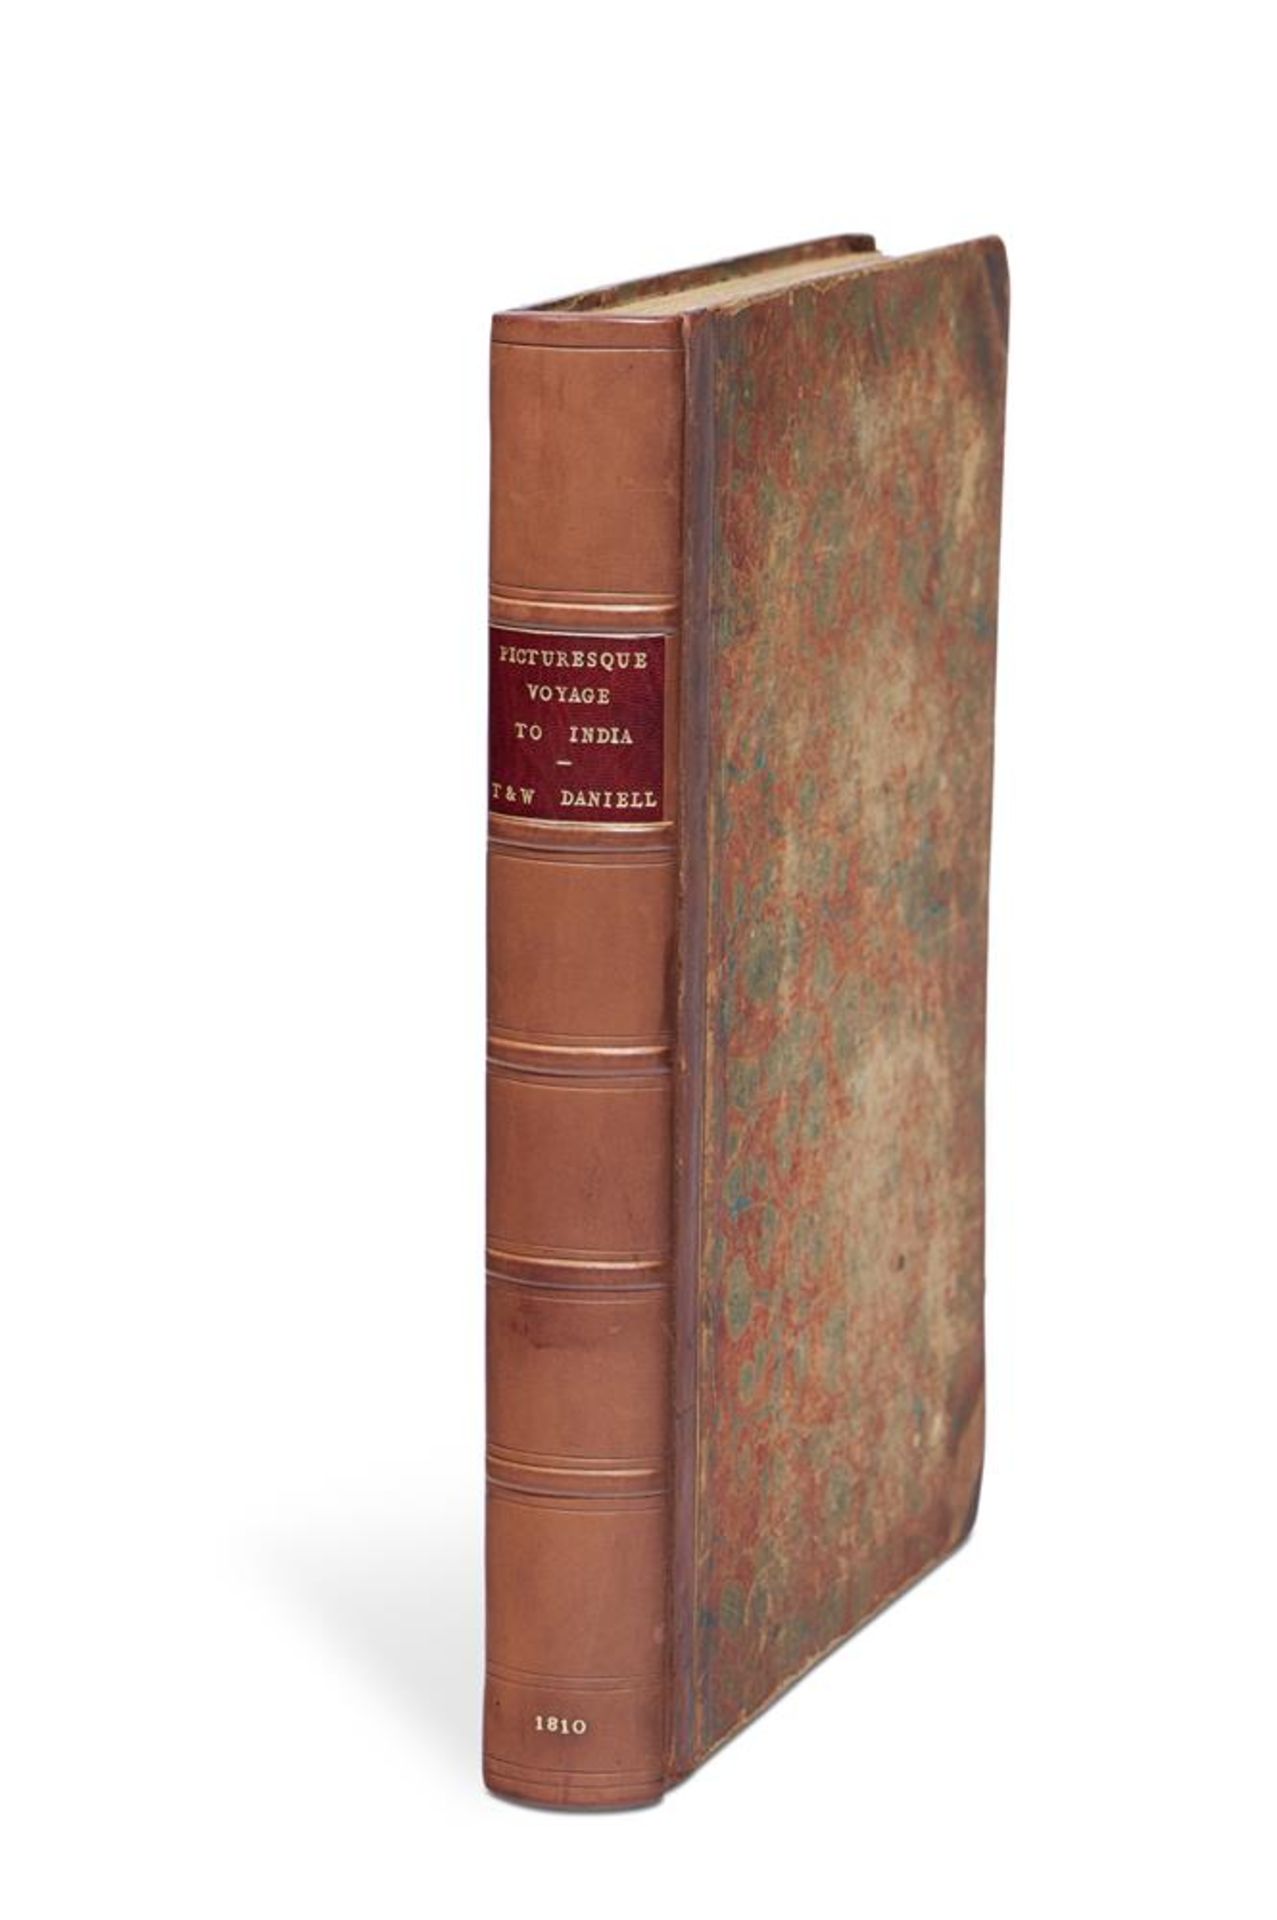 Ɵ Daniell (Thomas and William), A Picturesque Voyage to India by the Way of China